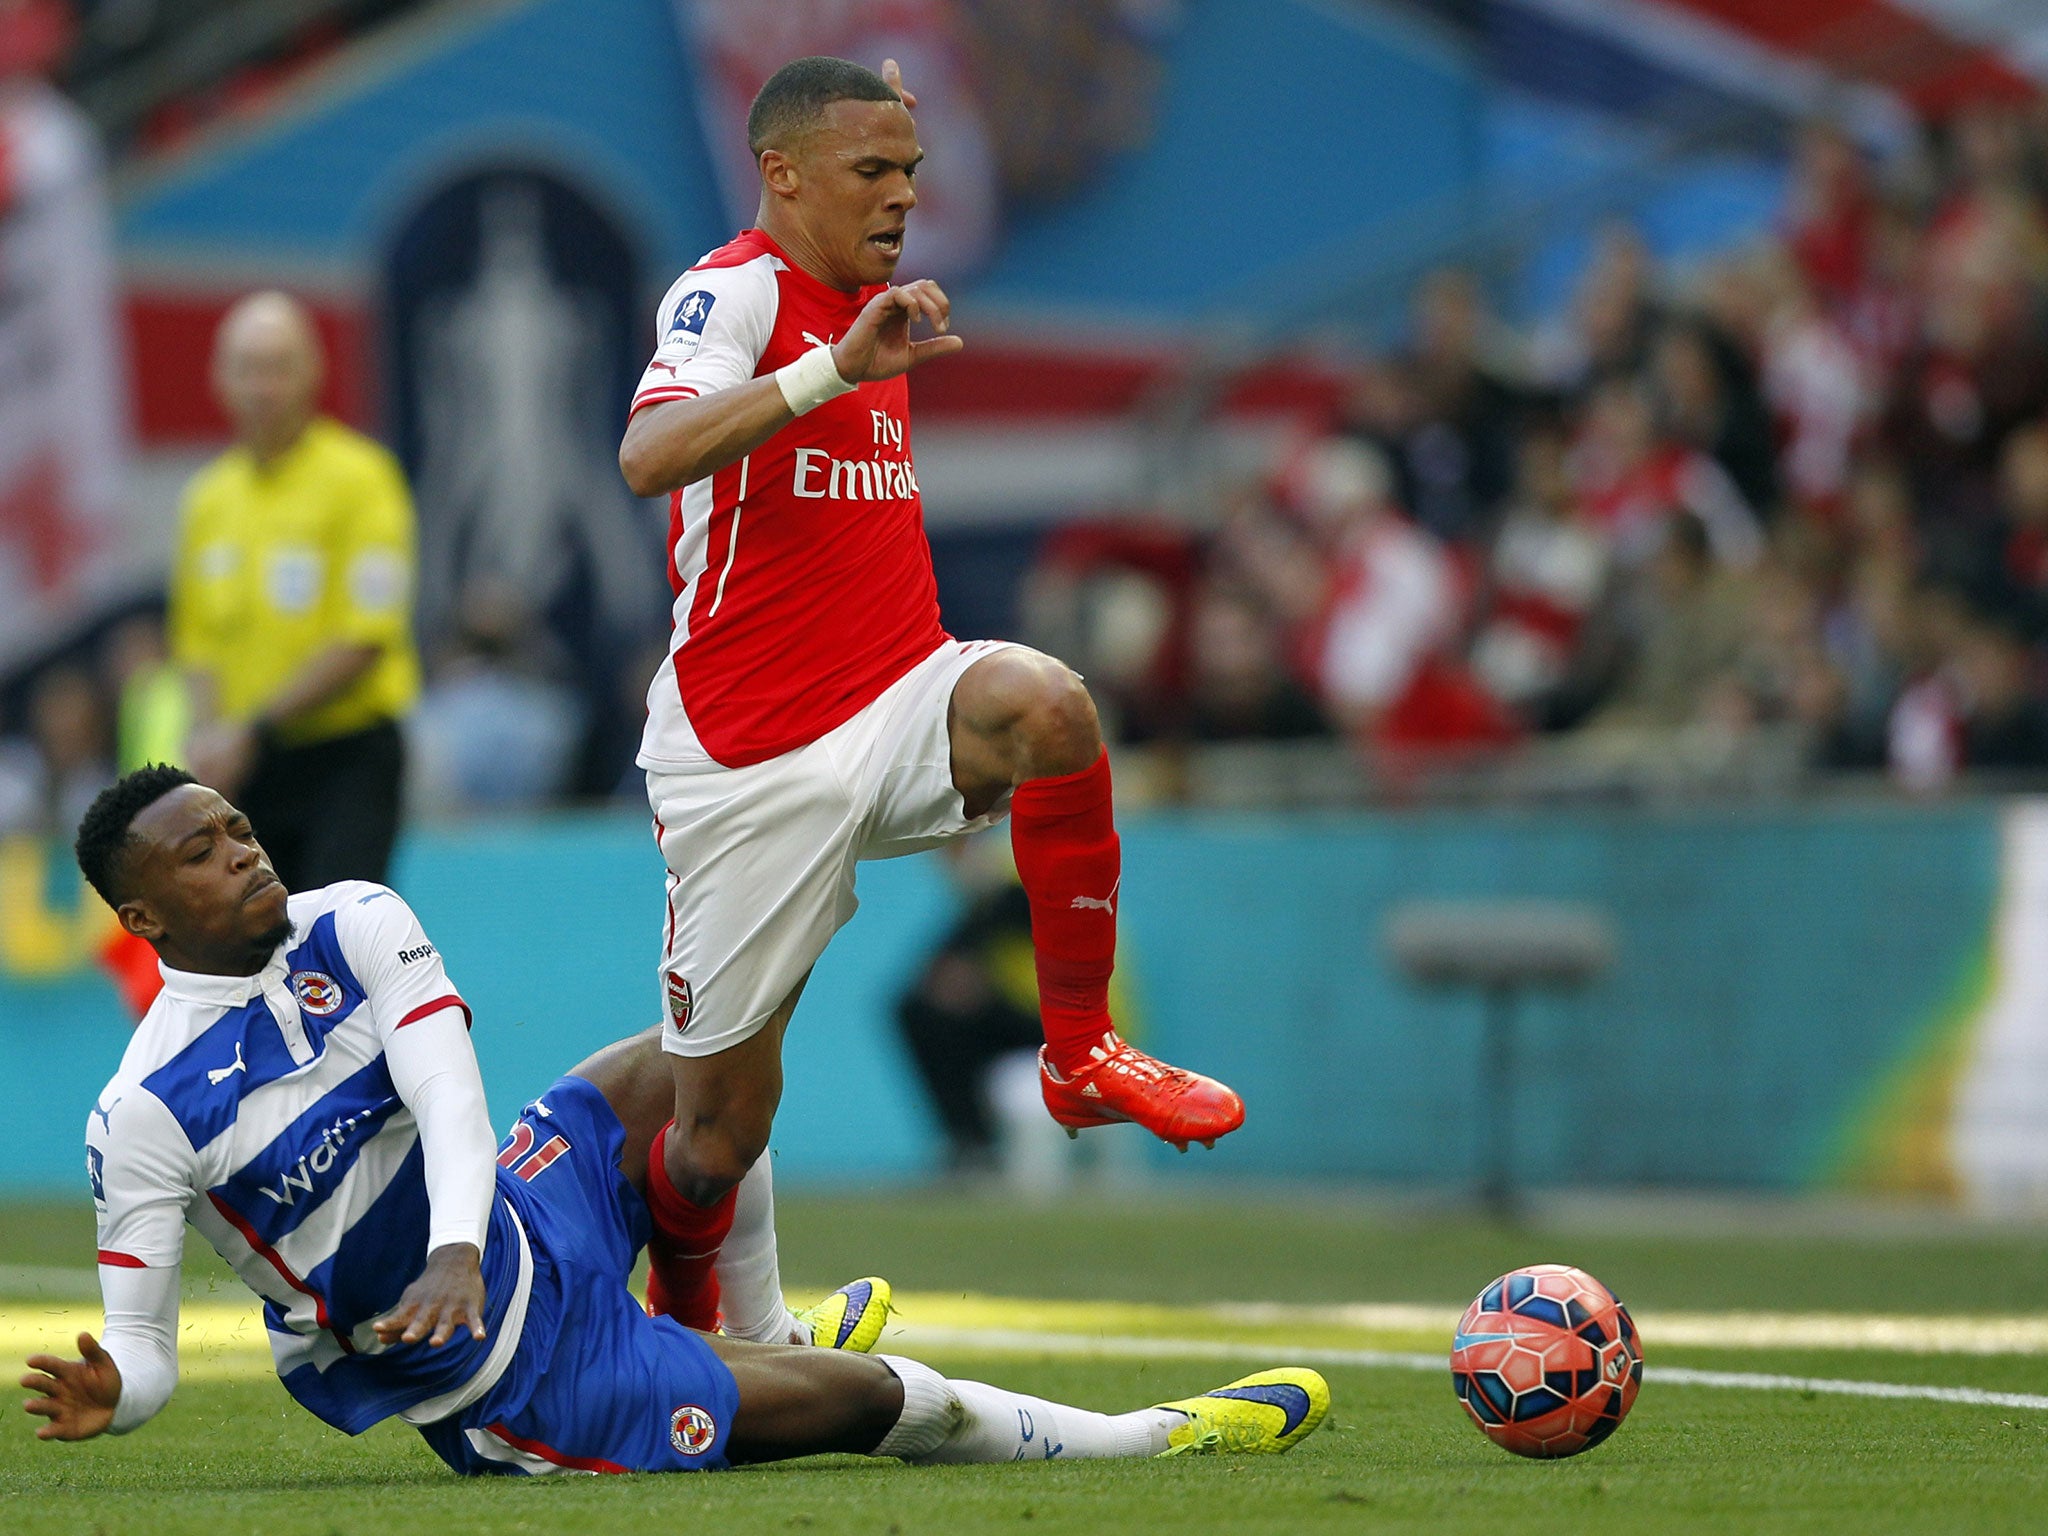 Chalobah against Arsenal at Wembley in the FA Cup semi-final while on loan for Reading